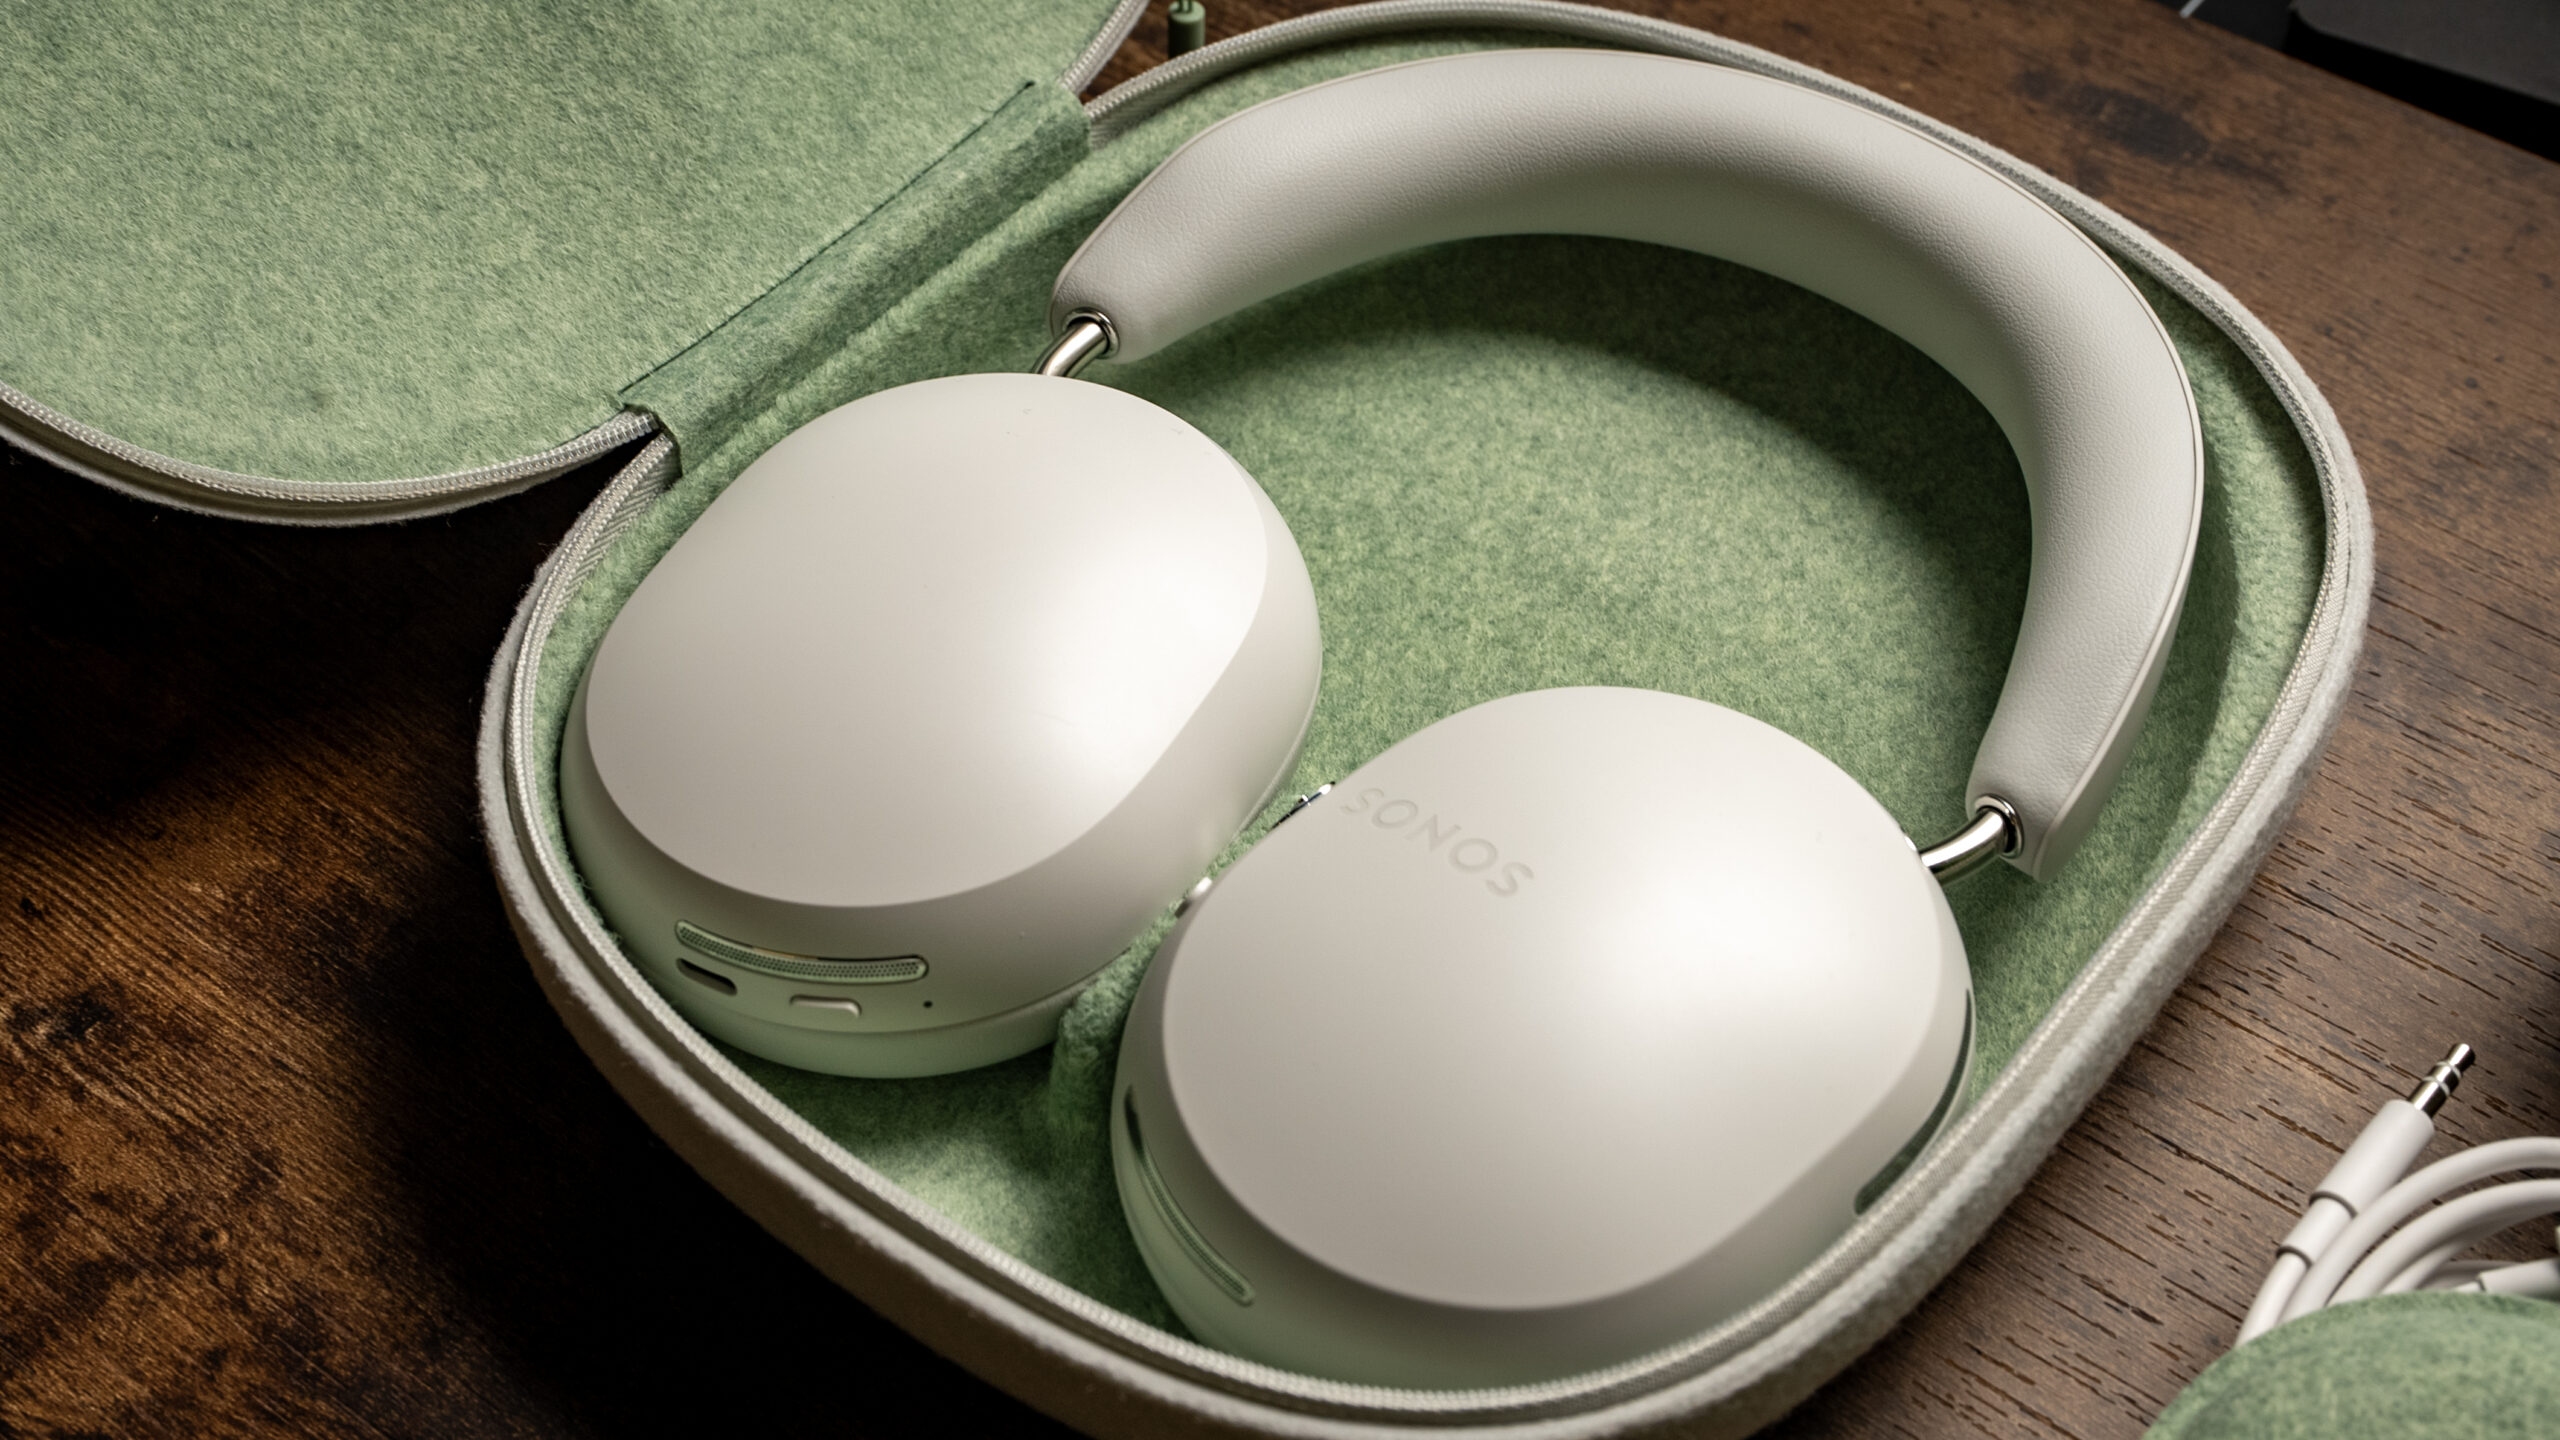 A picture of the Sonos Ace headphones placed inside of its mint green-interior carrying case